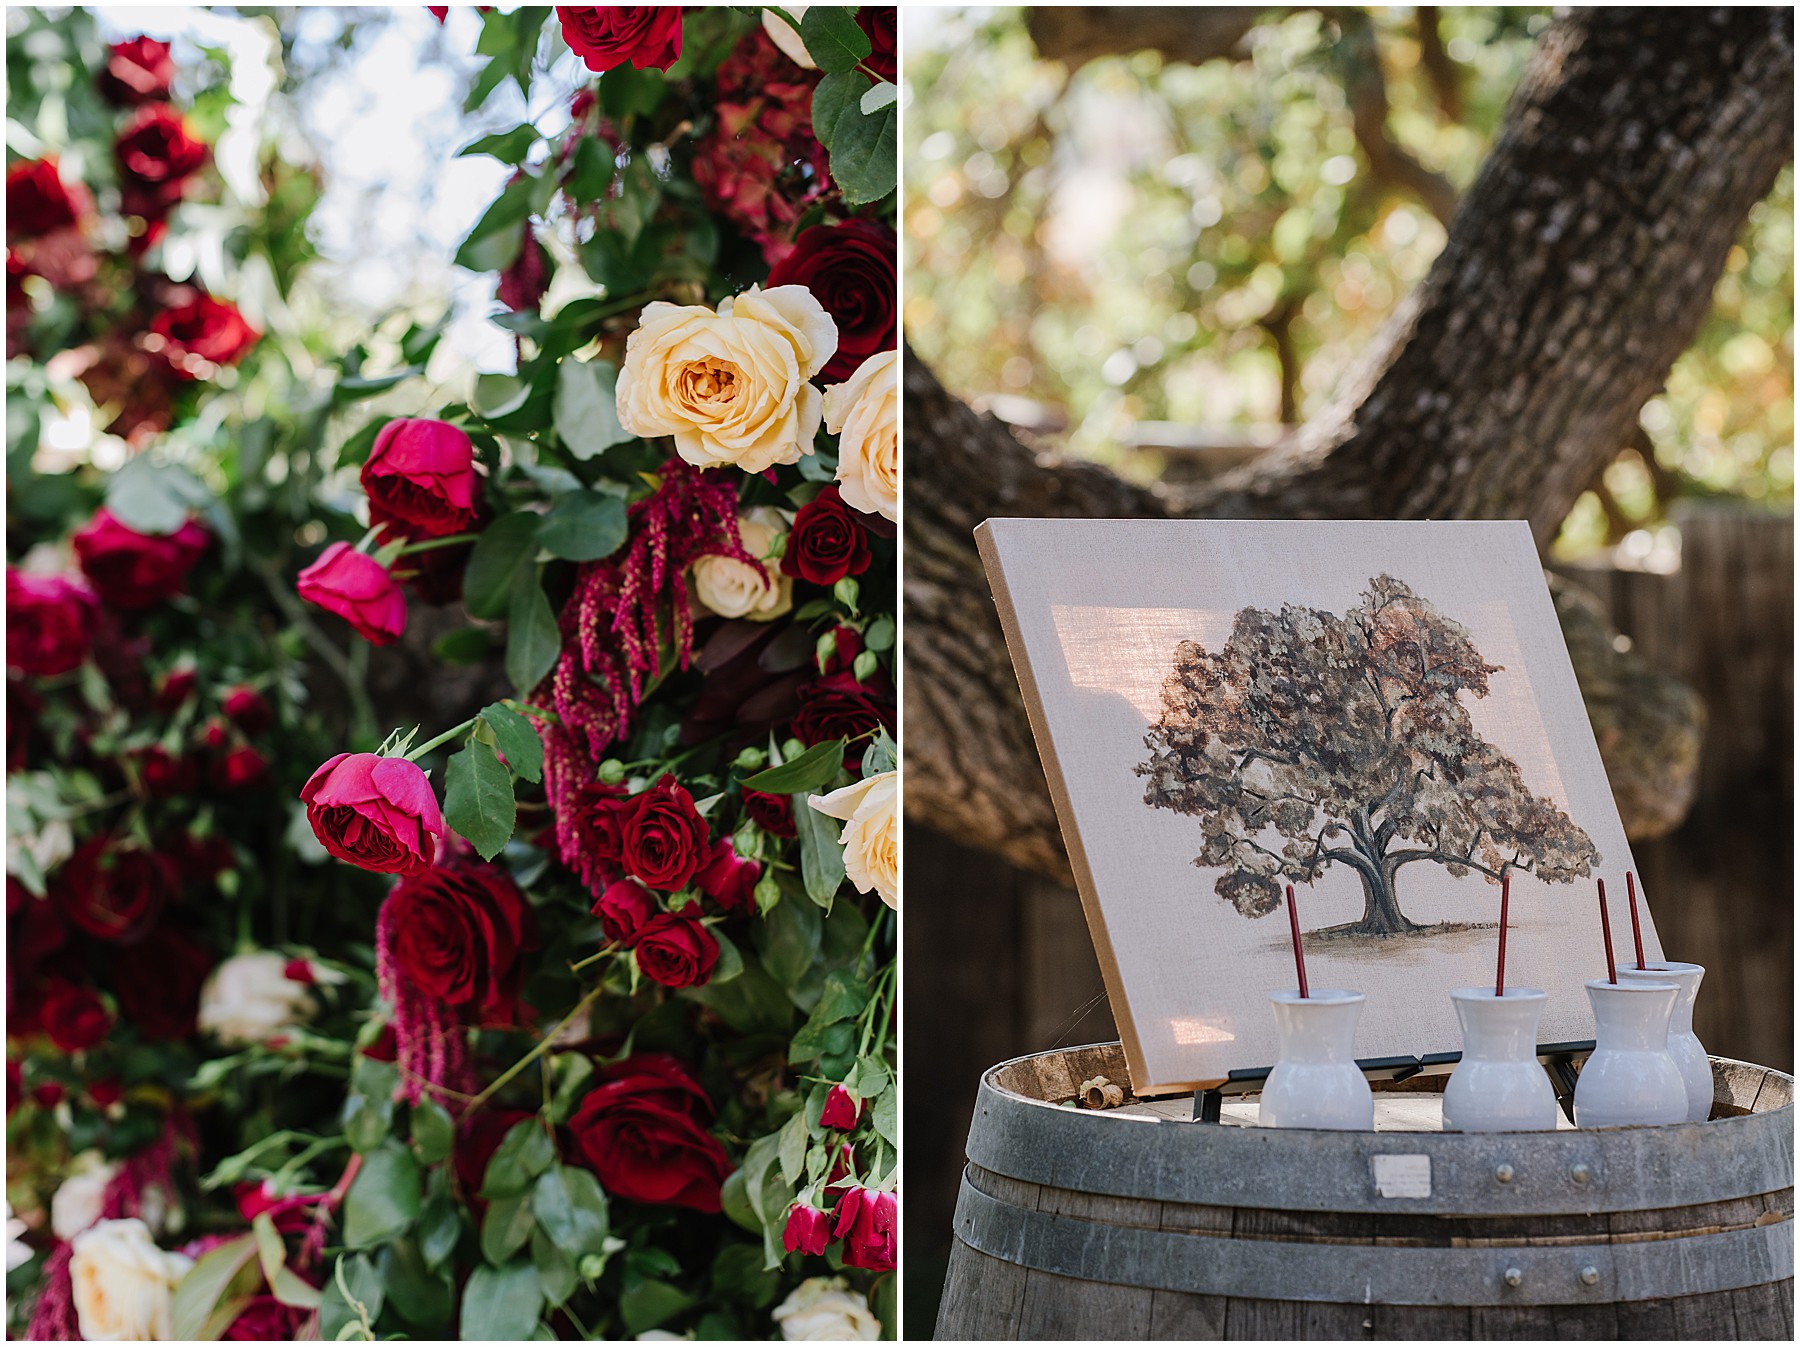 Hartley Farms California Wedding with jewel tones and rustic accents